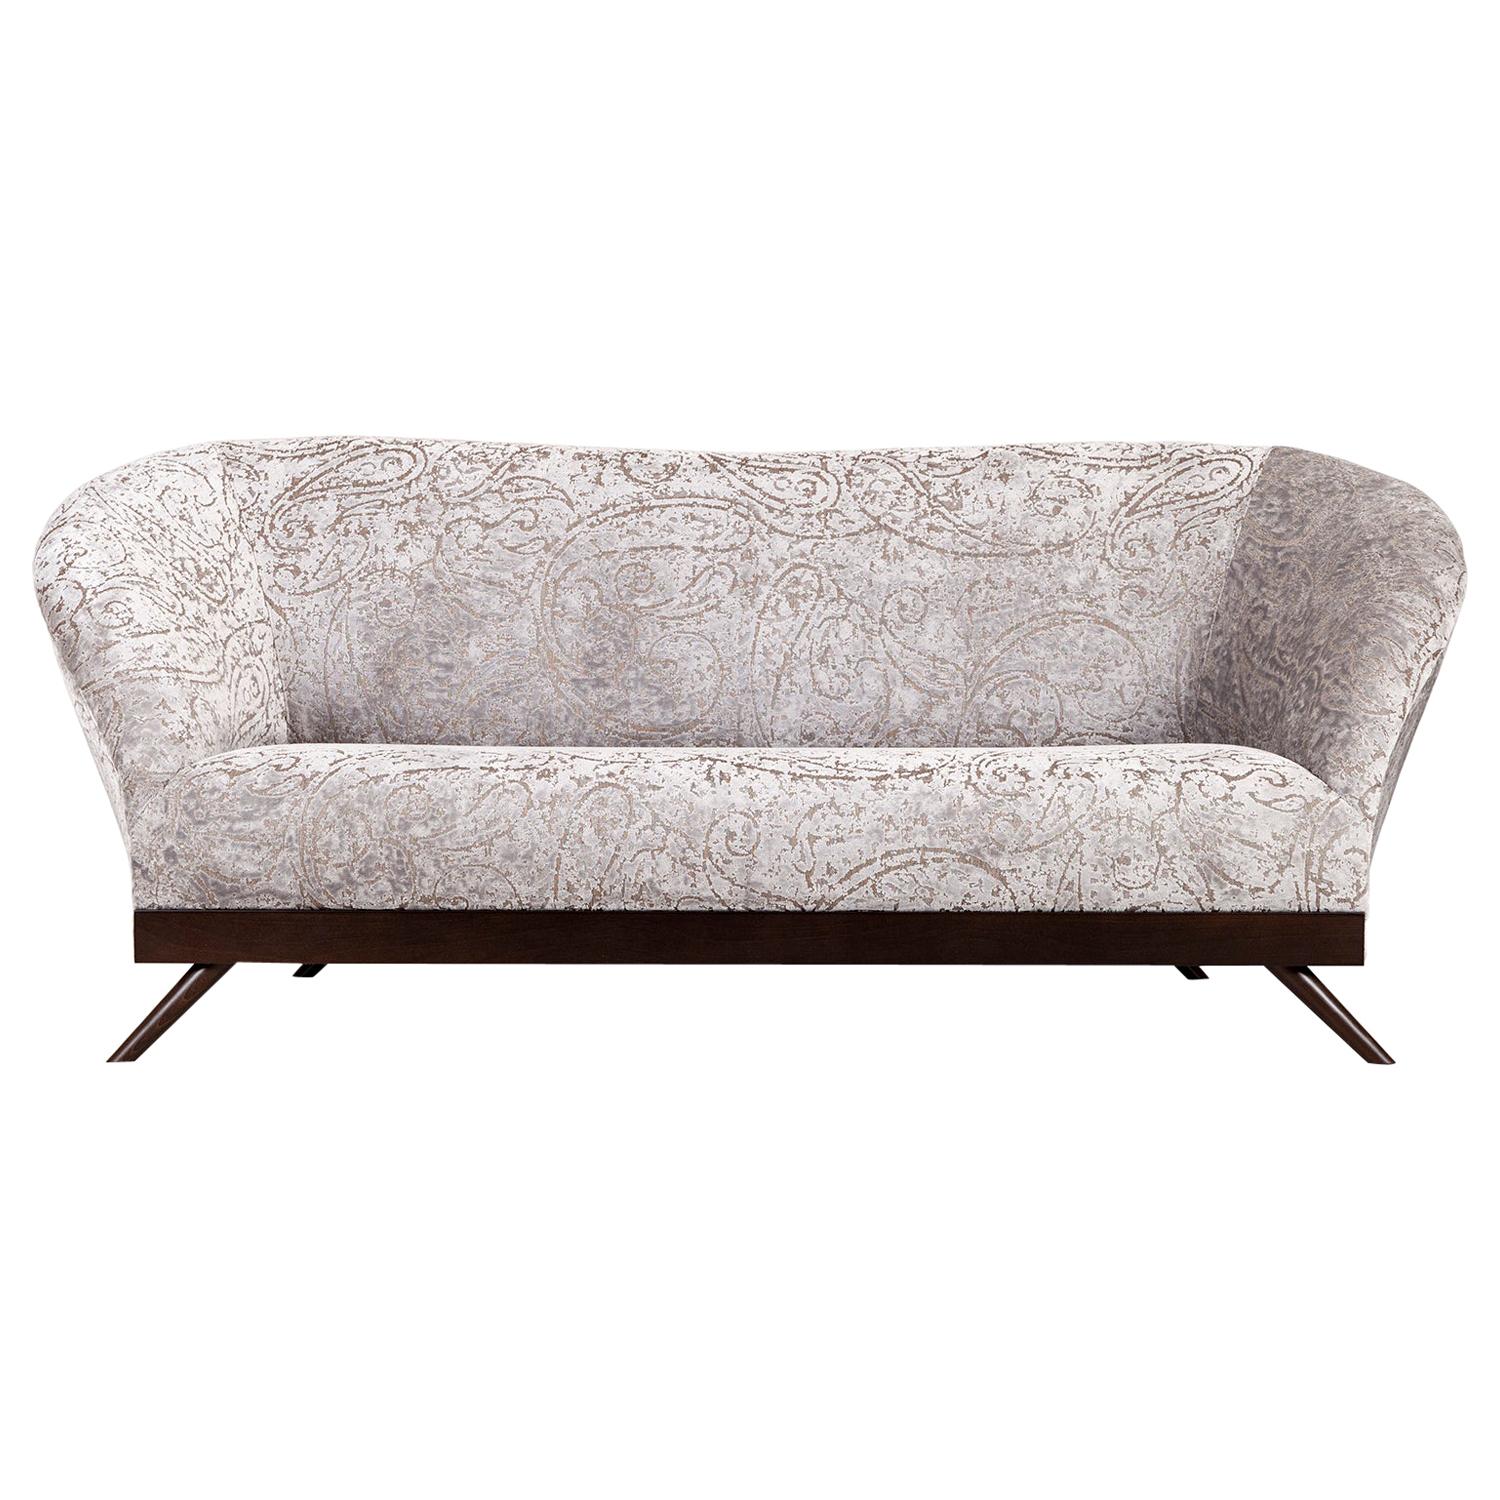 Cambridge 3-Seat Sofa in Pearl Jacquard Velvet Handcrafted by Greenapple